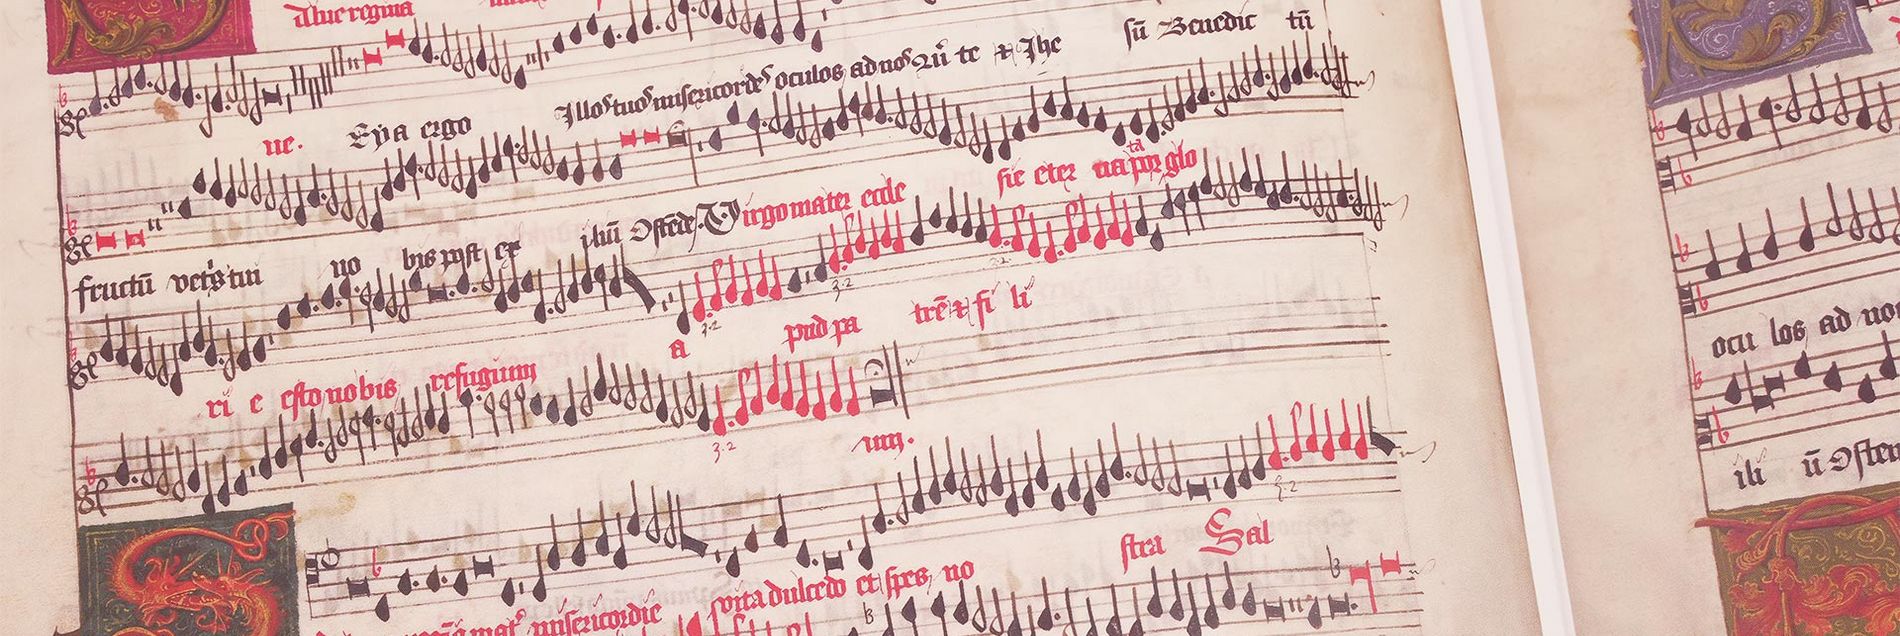 <i>“The largest collection of pre-Reformation England's Latin choral tradition”</i>